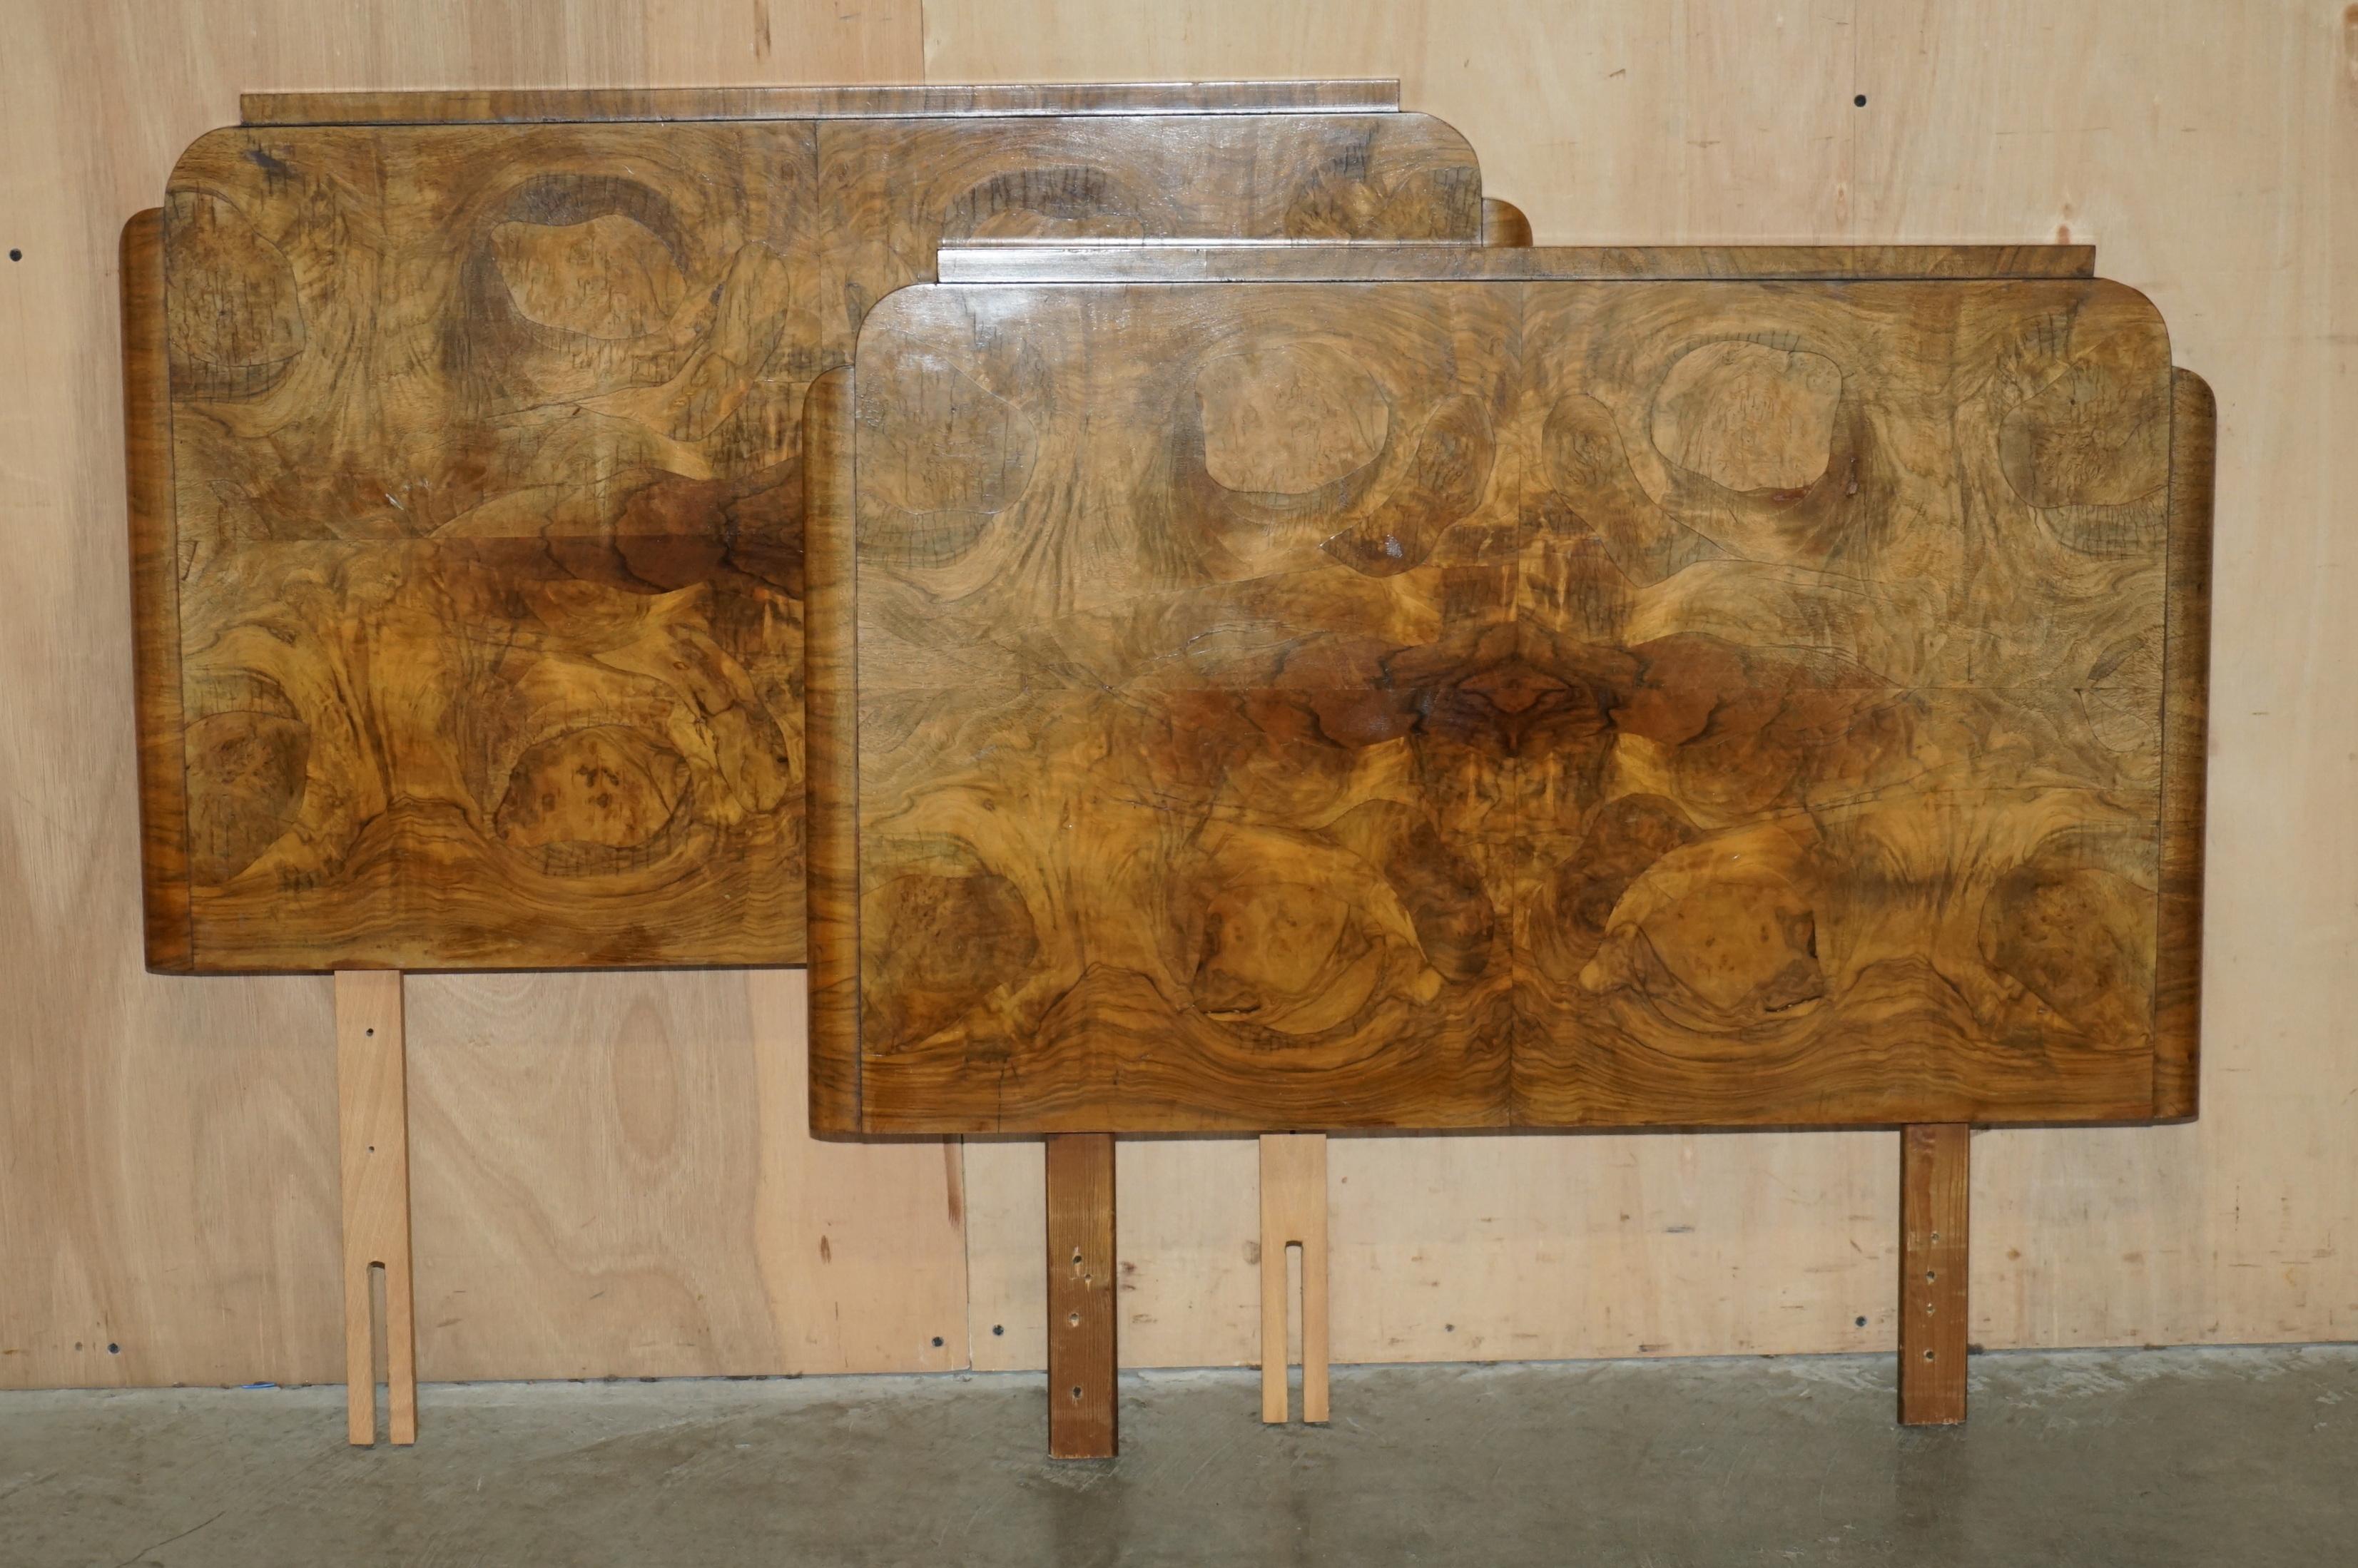 Royal House Antiques

Royal House Antiques is delighted to offer for sale this pair of sublime quality original Art Deco circa 1920-1930 Burr Walnut headboards or head and foot boards which are part of a suite

Please note the delivery fee listed is